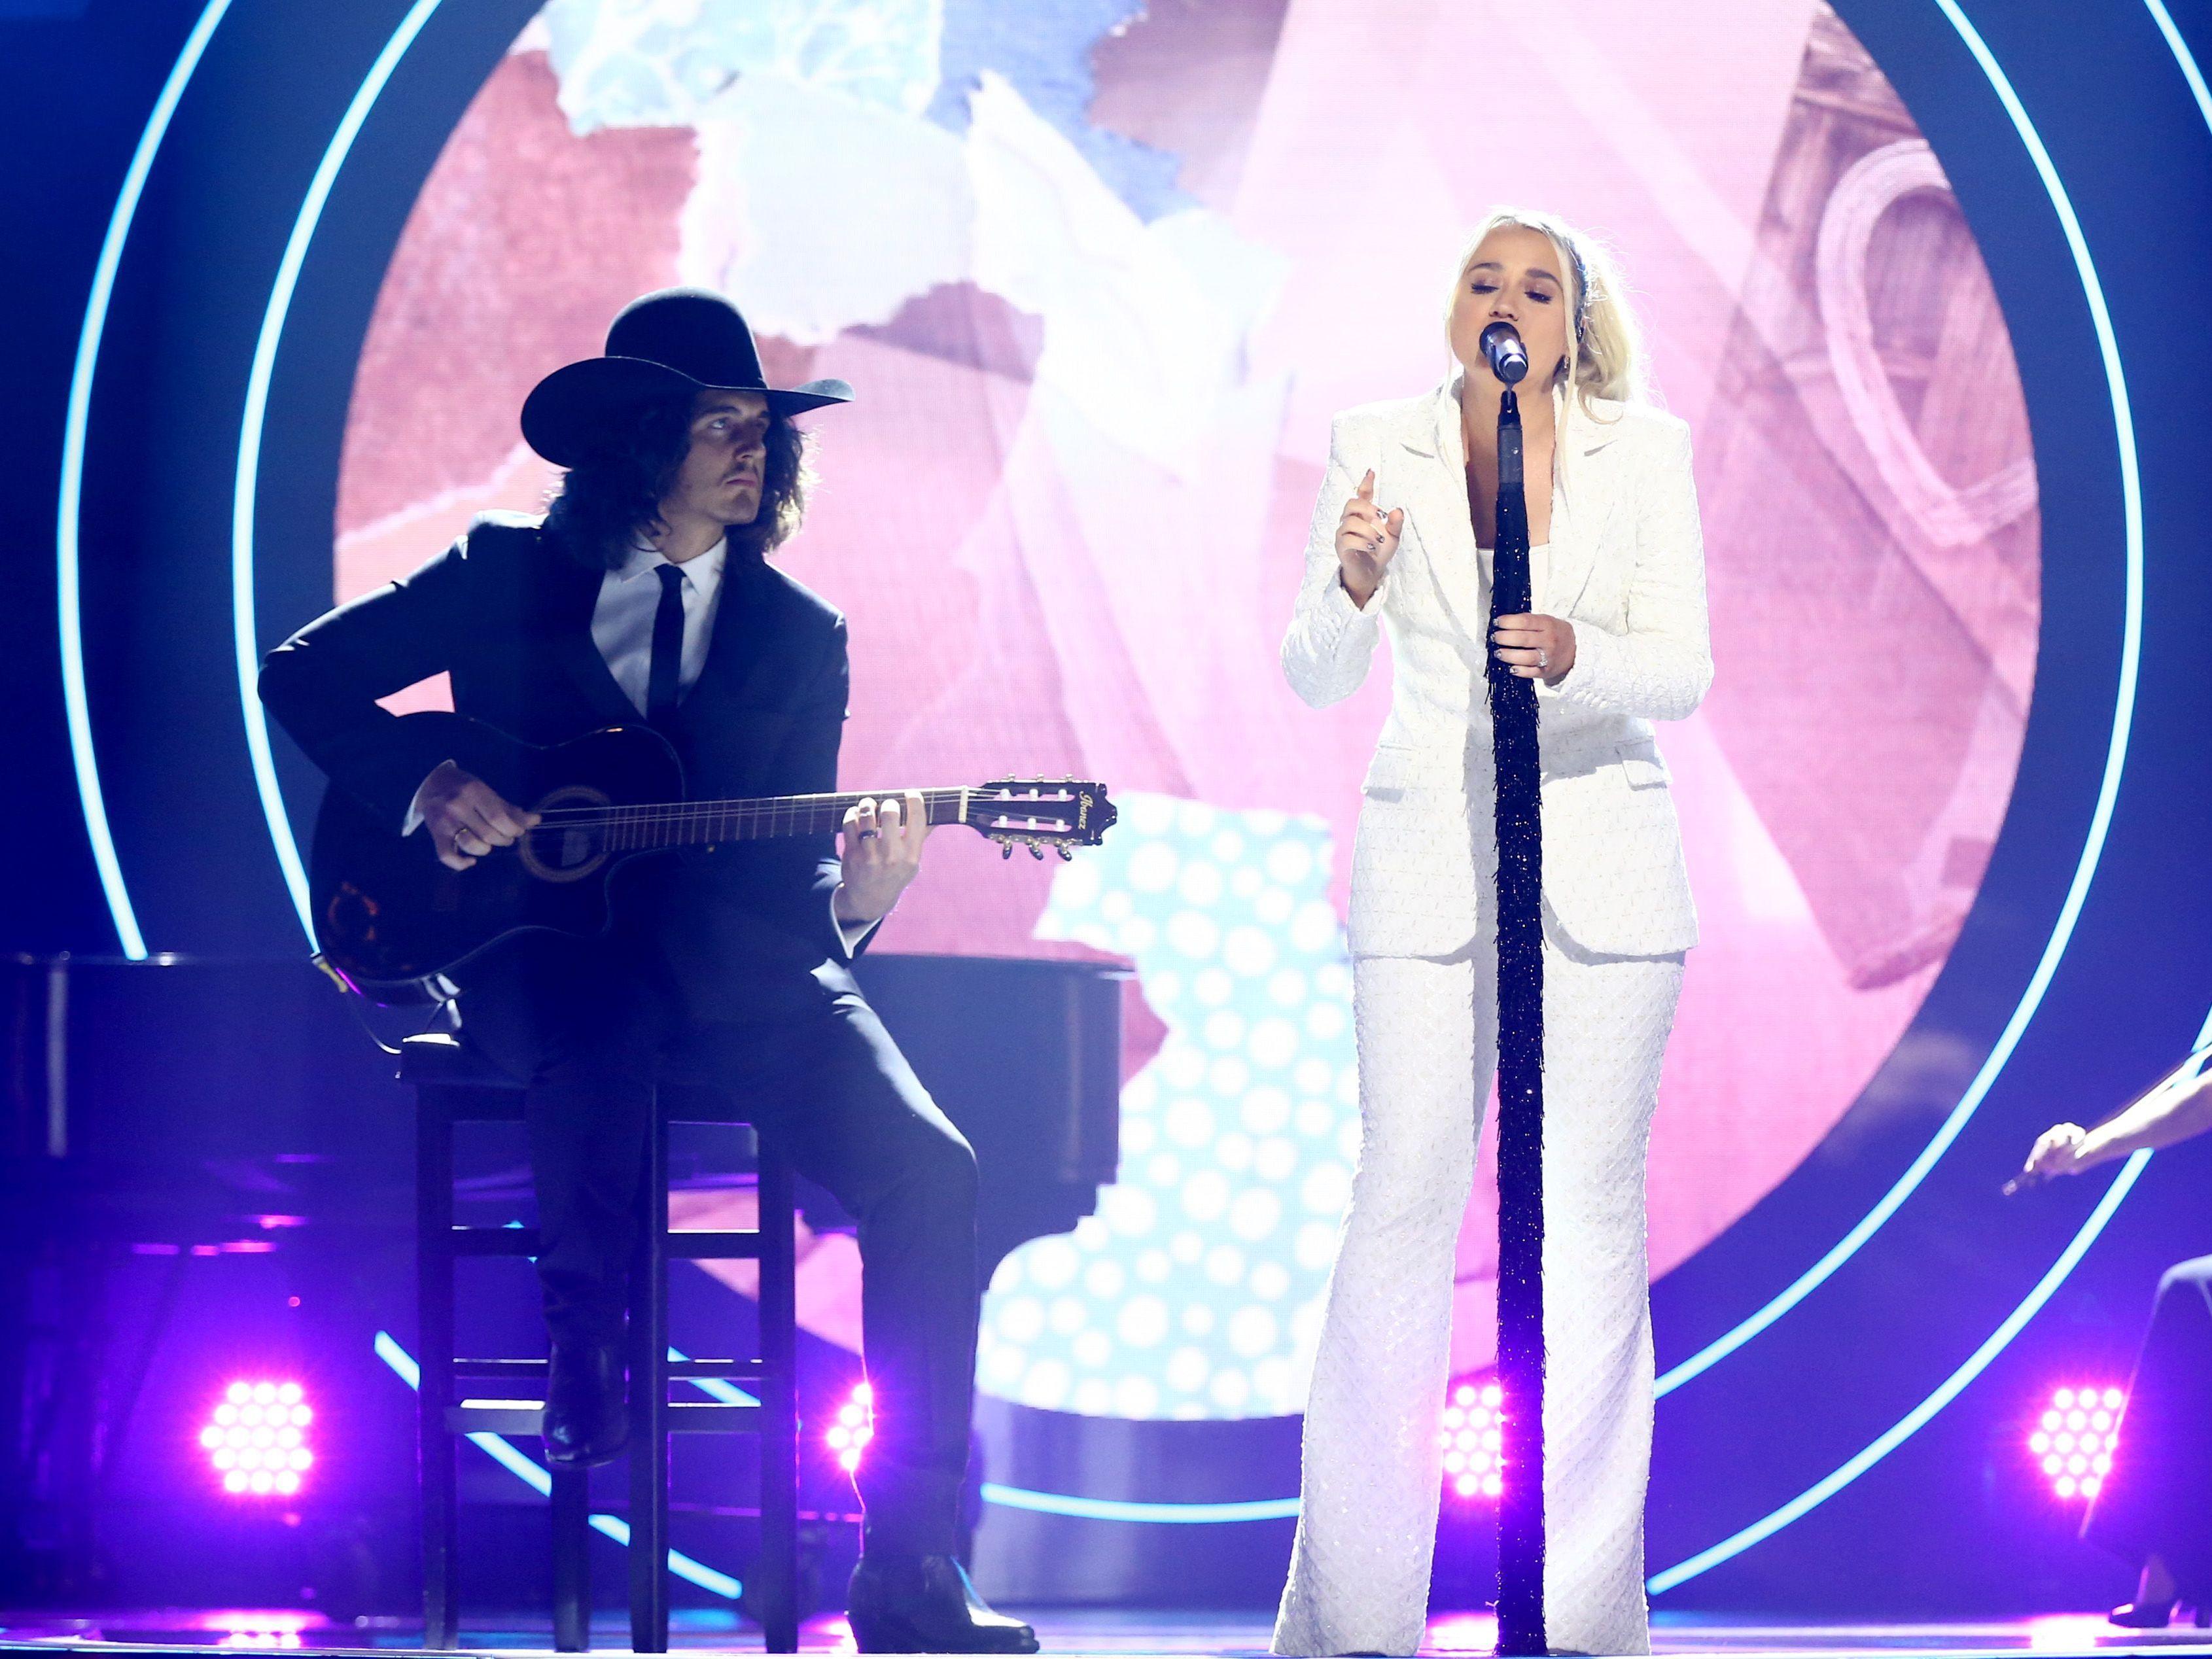 2021 CMT Artists Of The Year honoree Gabby Barrett performing "The Good Ones" LIVE with husband Cade Foehner on guitar
